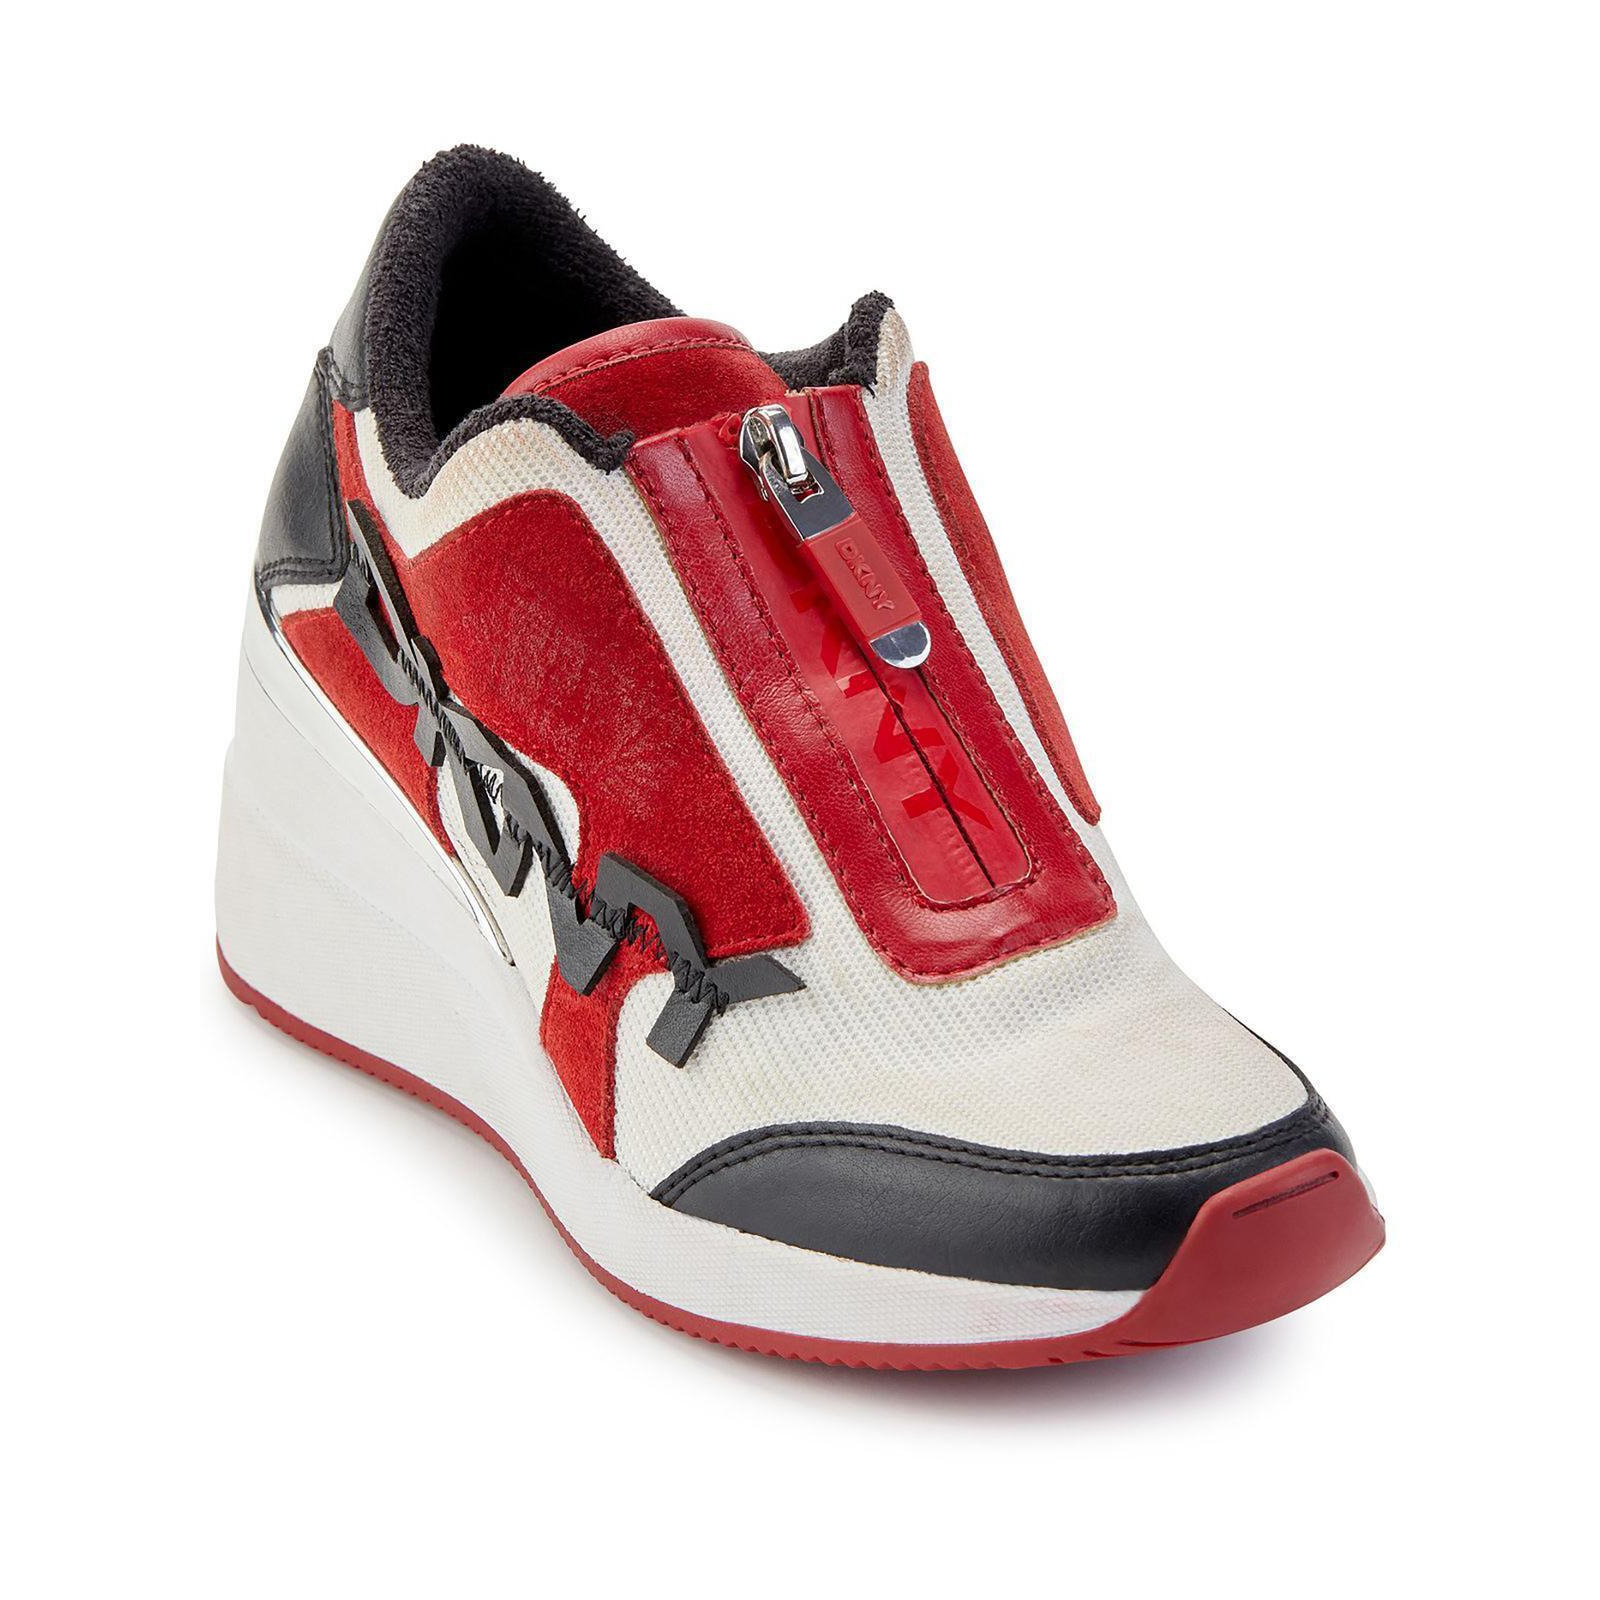 Dkny Red Shoes | lupon.gov.ph